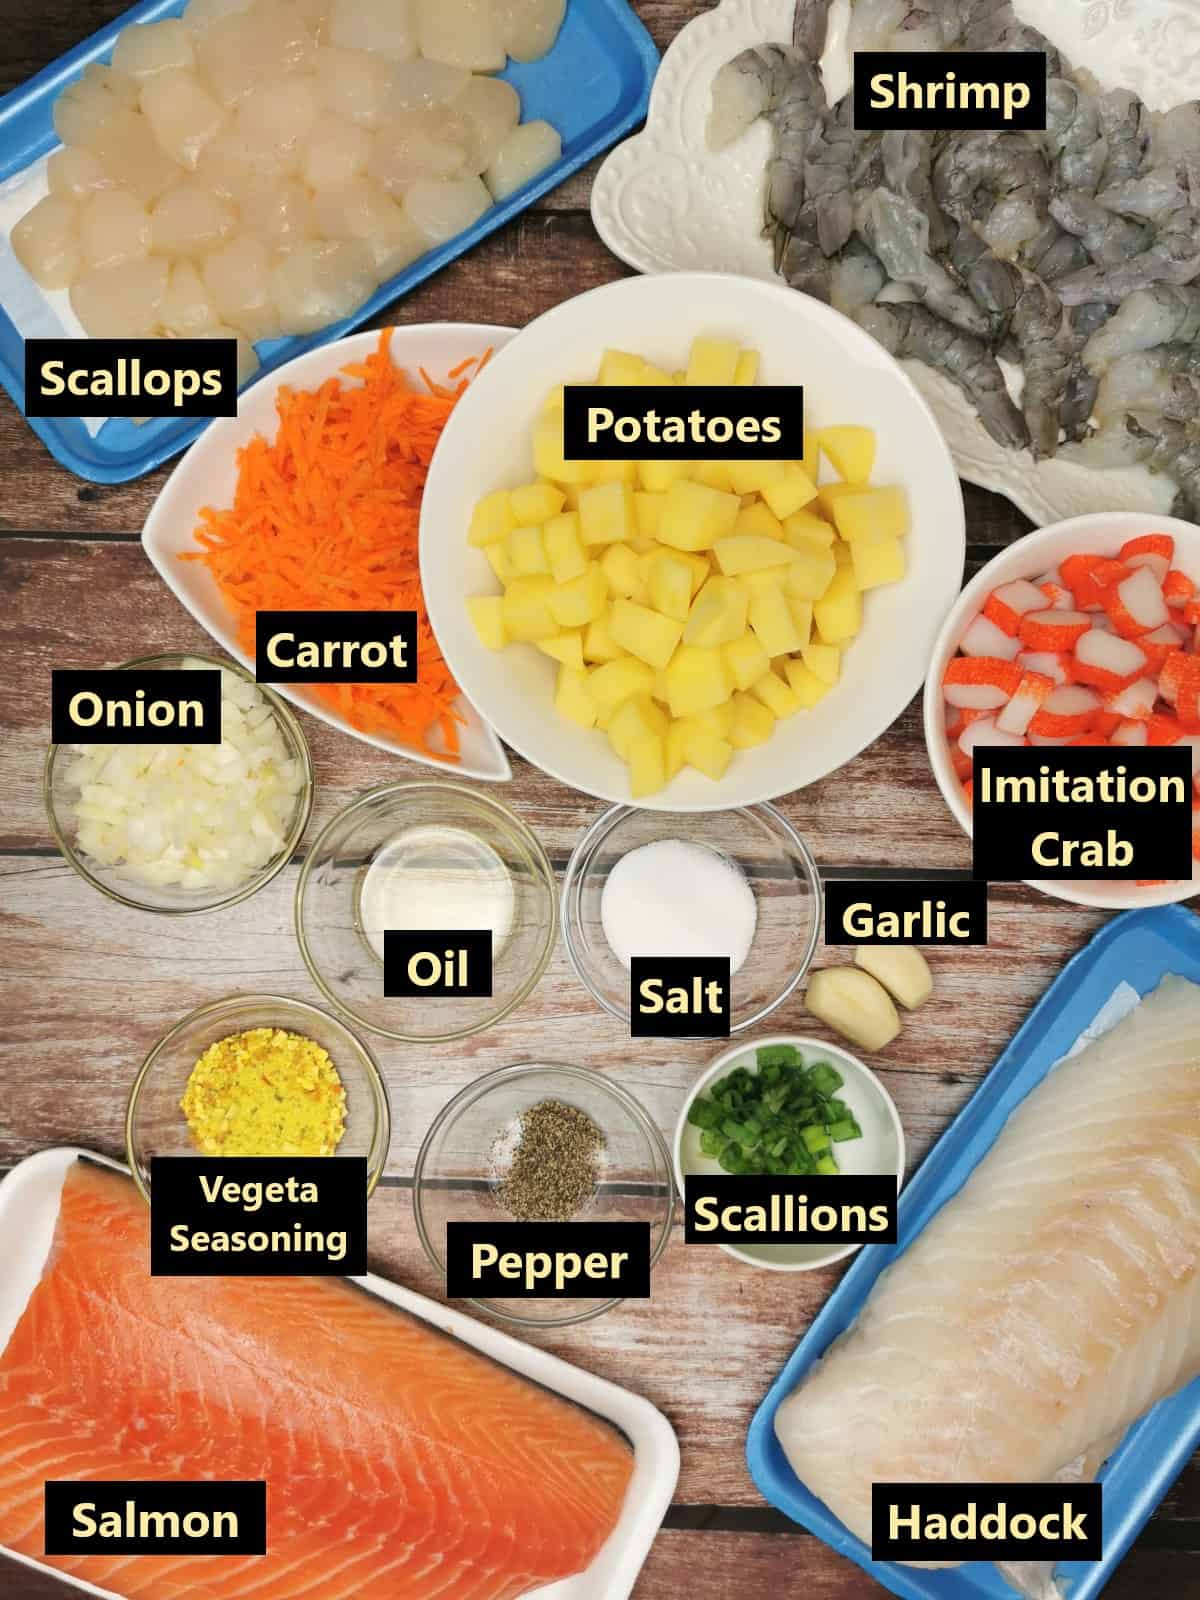 All ingredients of the seafood soup labeled.